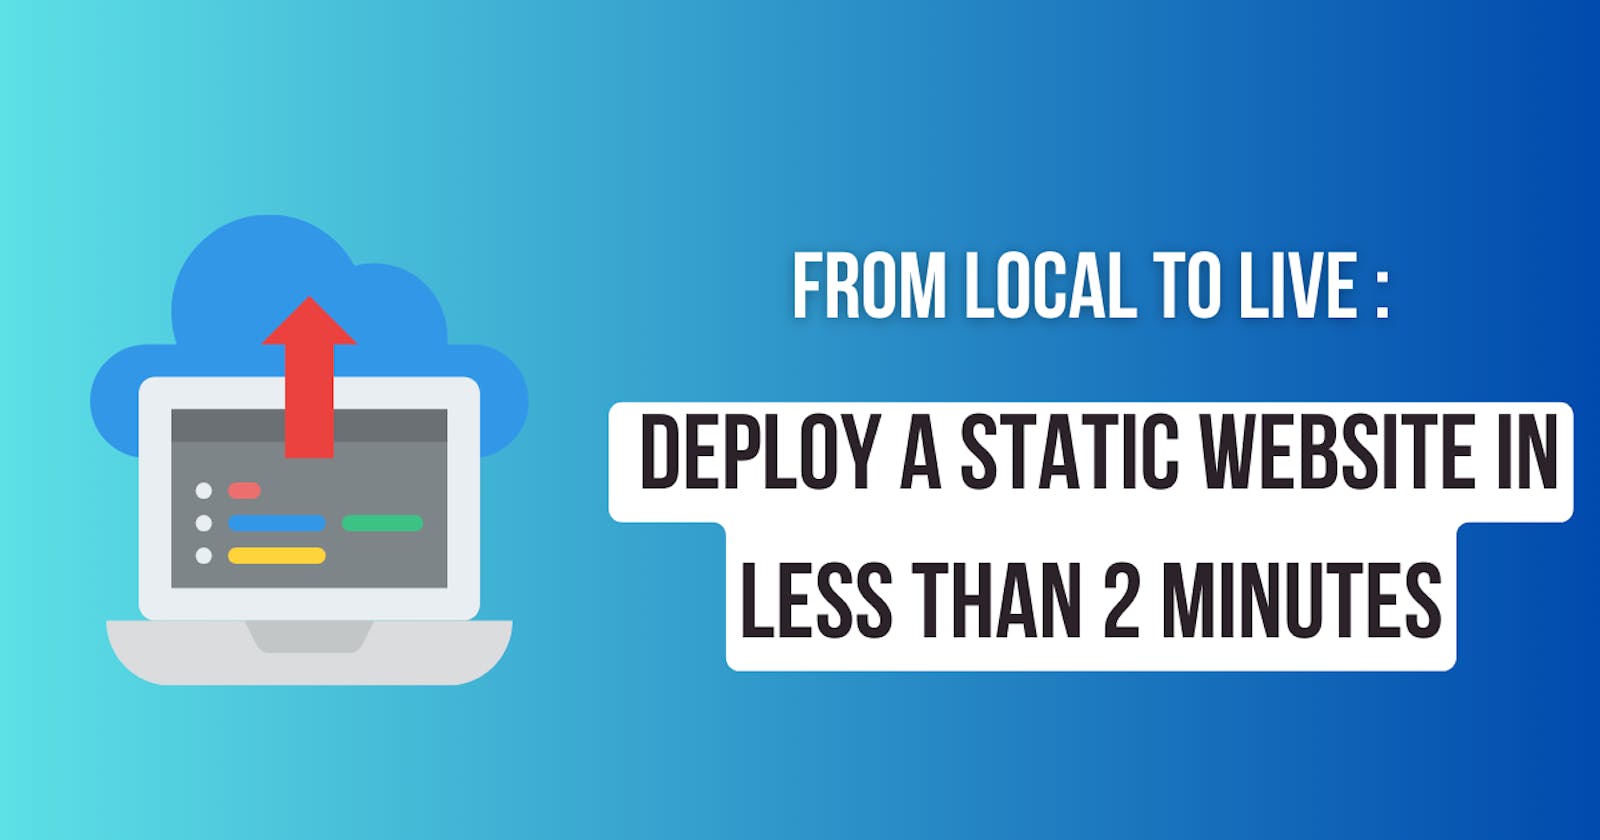 From Local to Live: Deploy a Static Website in Less Than 2 Minutes